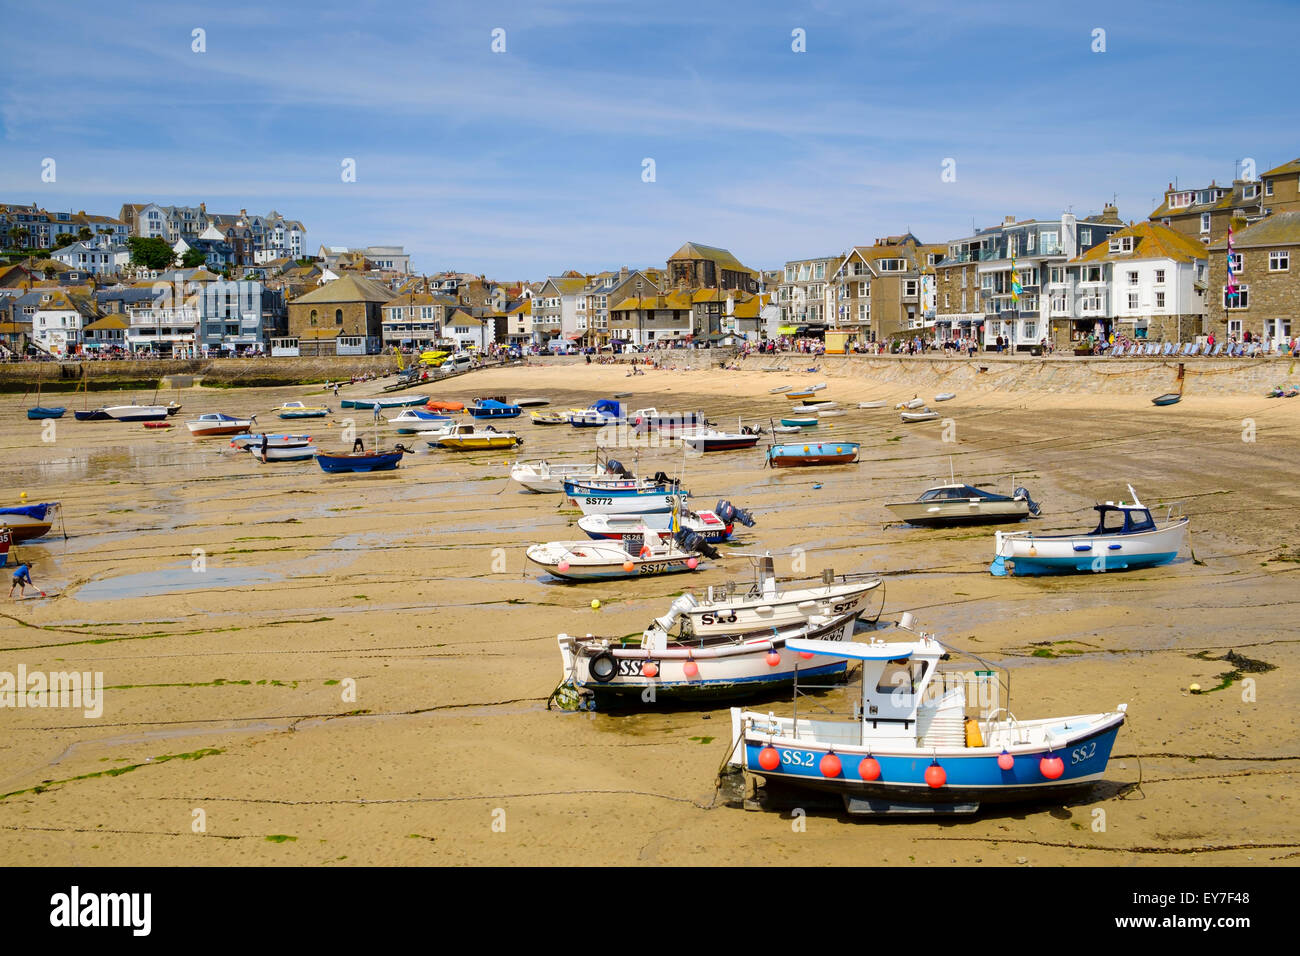 St Ives, Cornwall, England, UK - the harbor, beach and fishing boats at low tide in summer Stock Photo